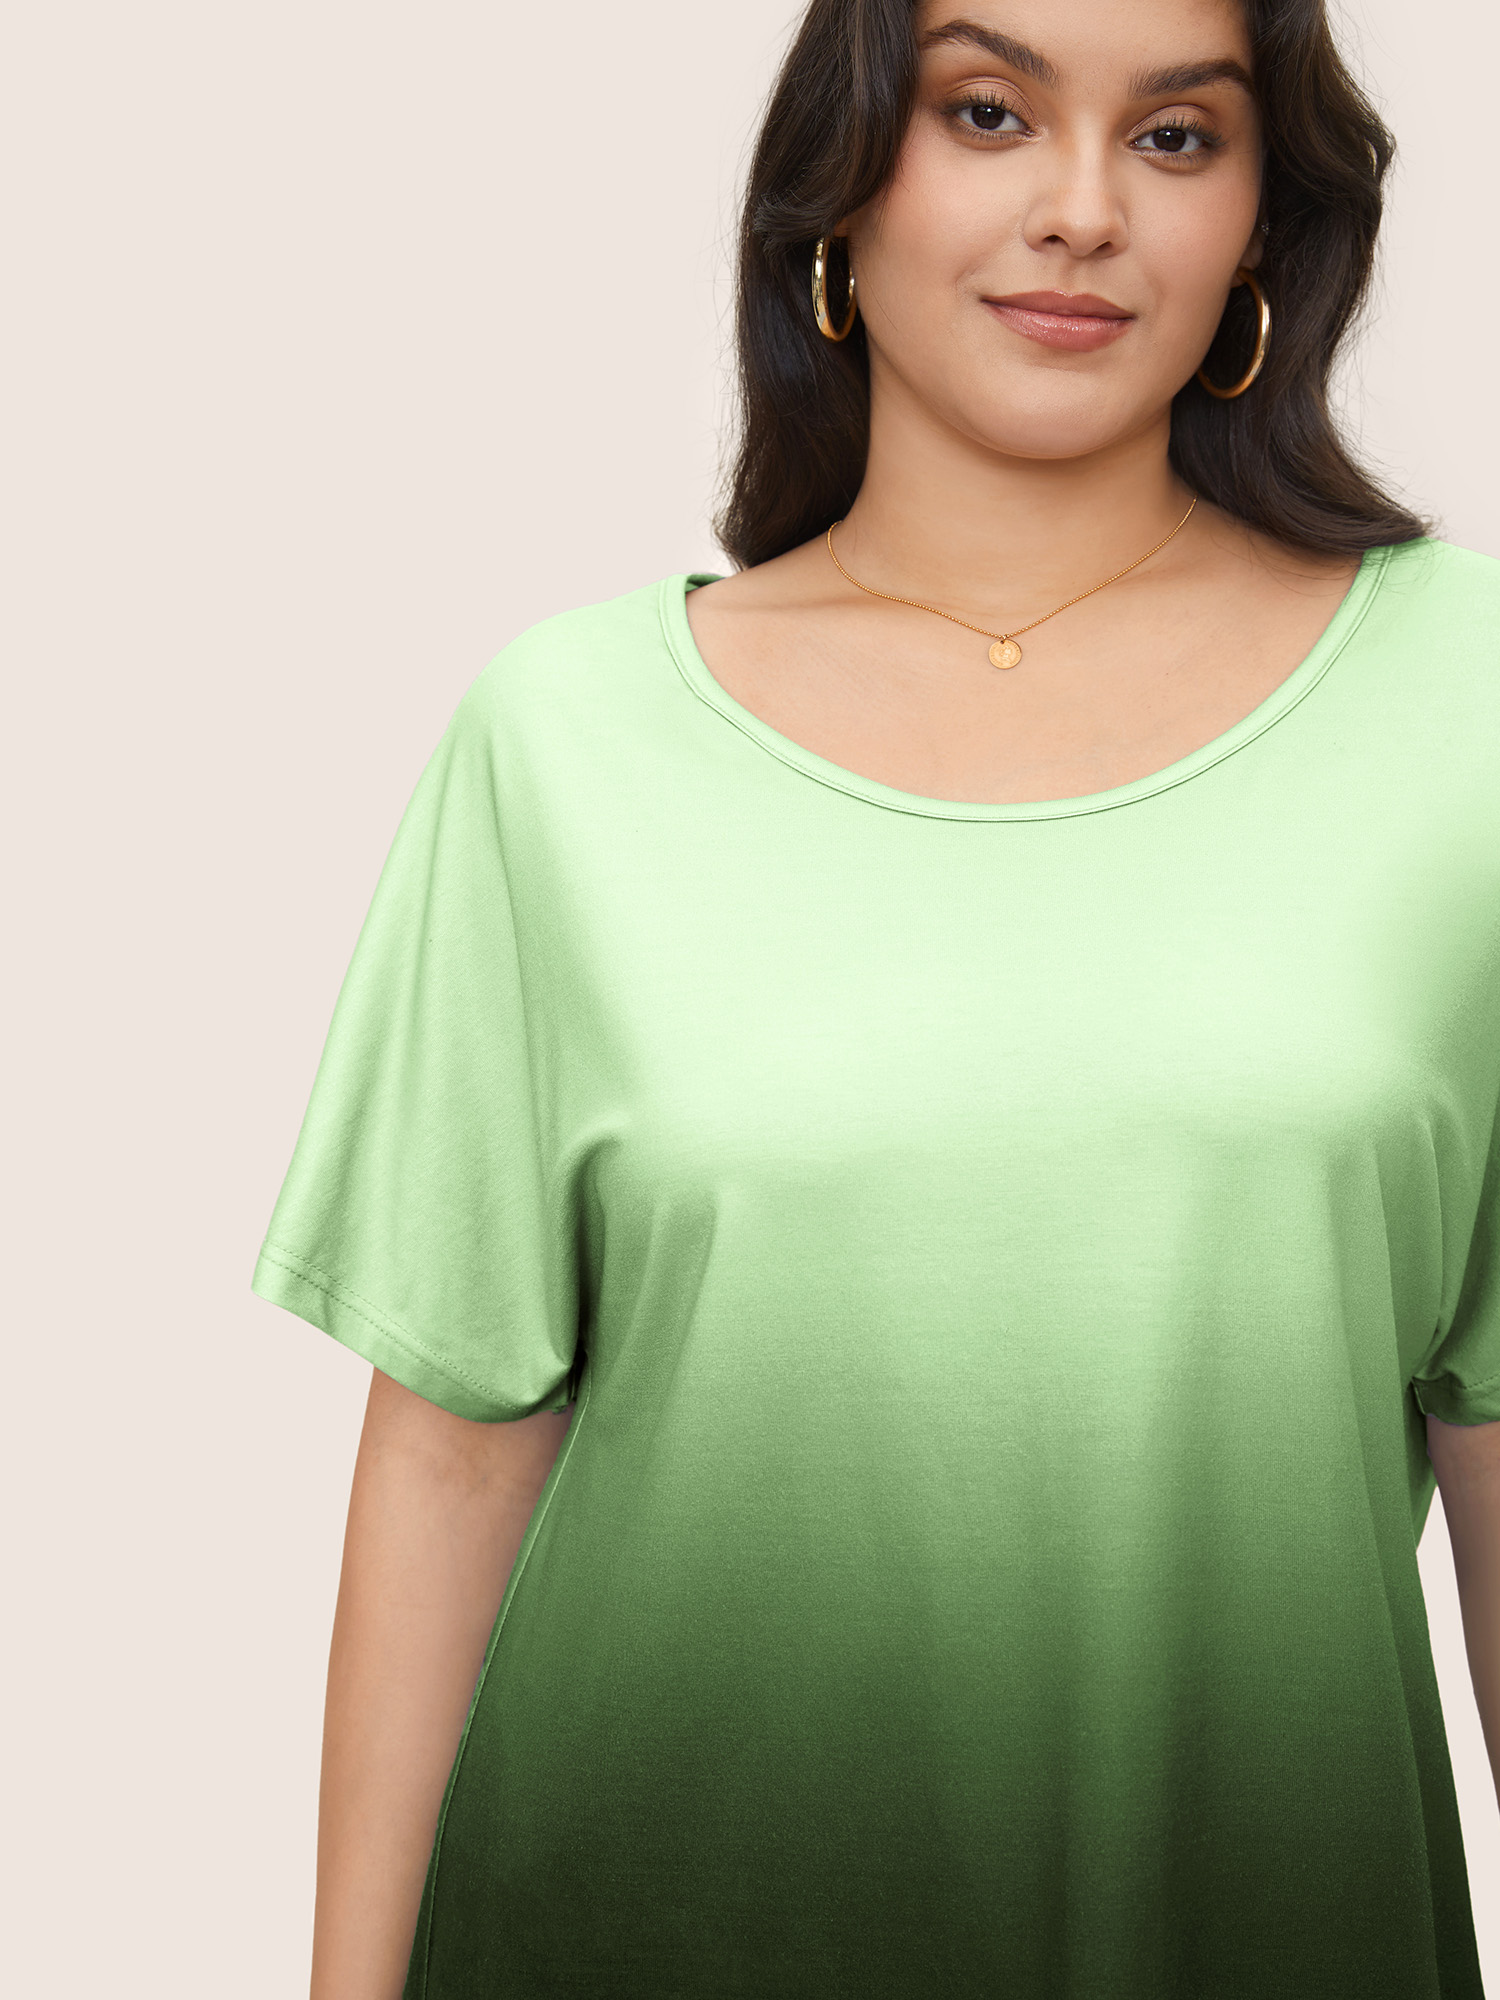 

Plus Size Ombre Round Neck Batwing Sleeve T-shirt DarkGreen Women Casual U-neck Everyday T-shirts BloomChic